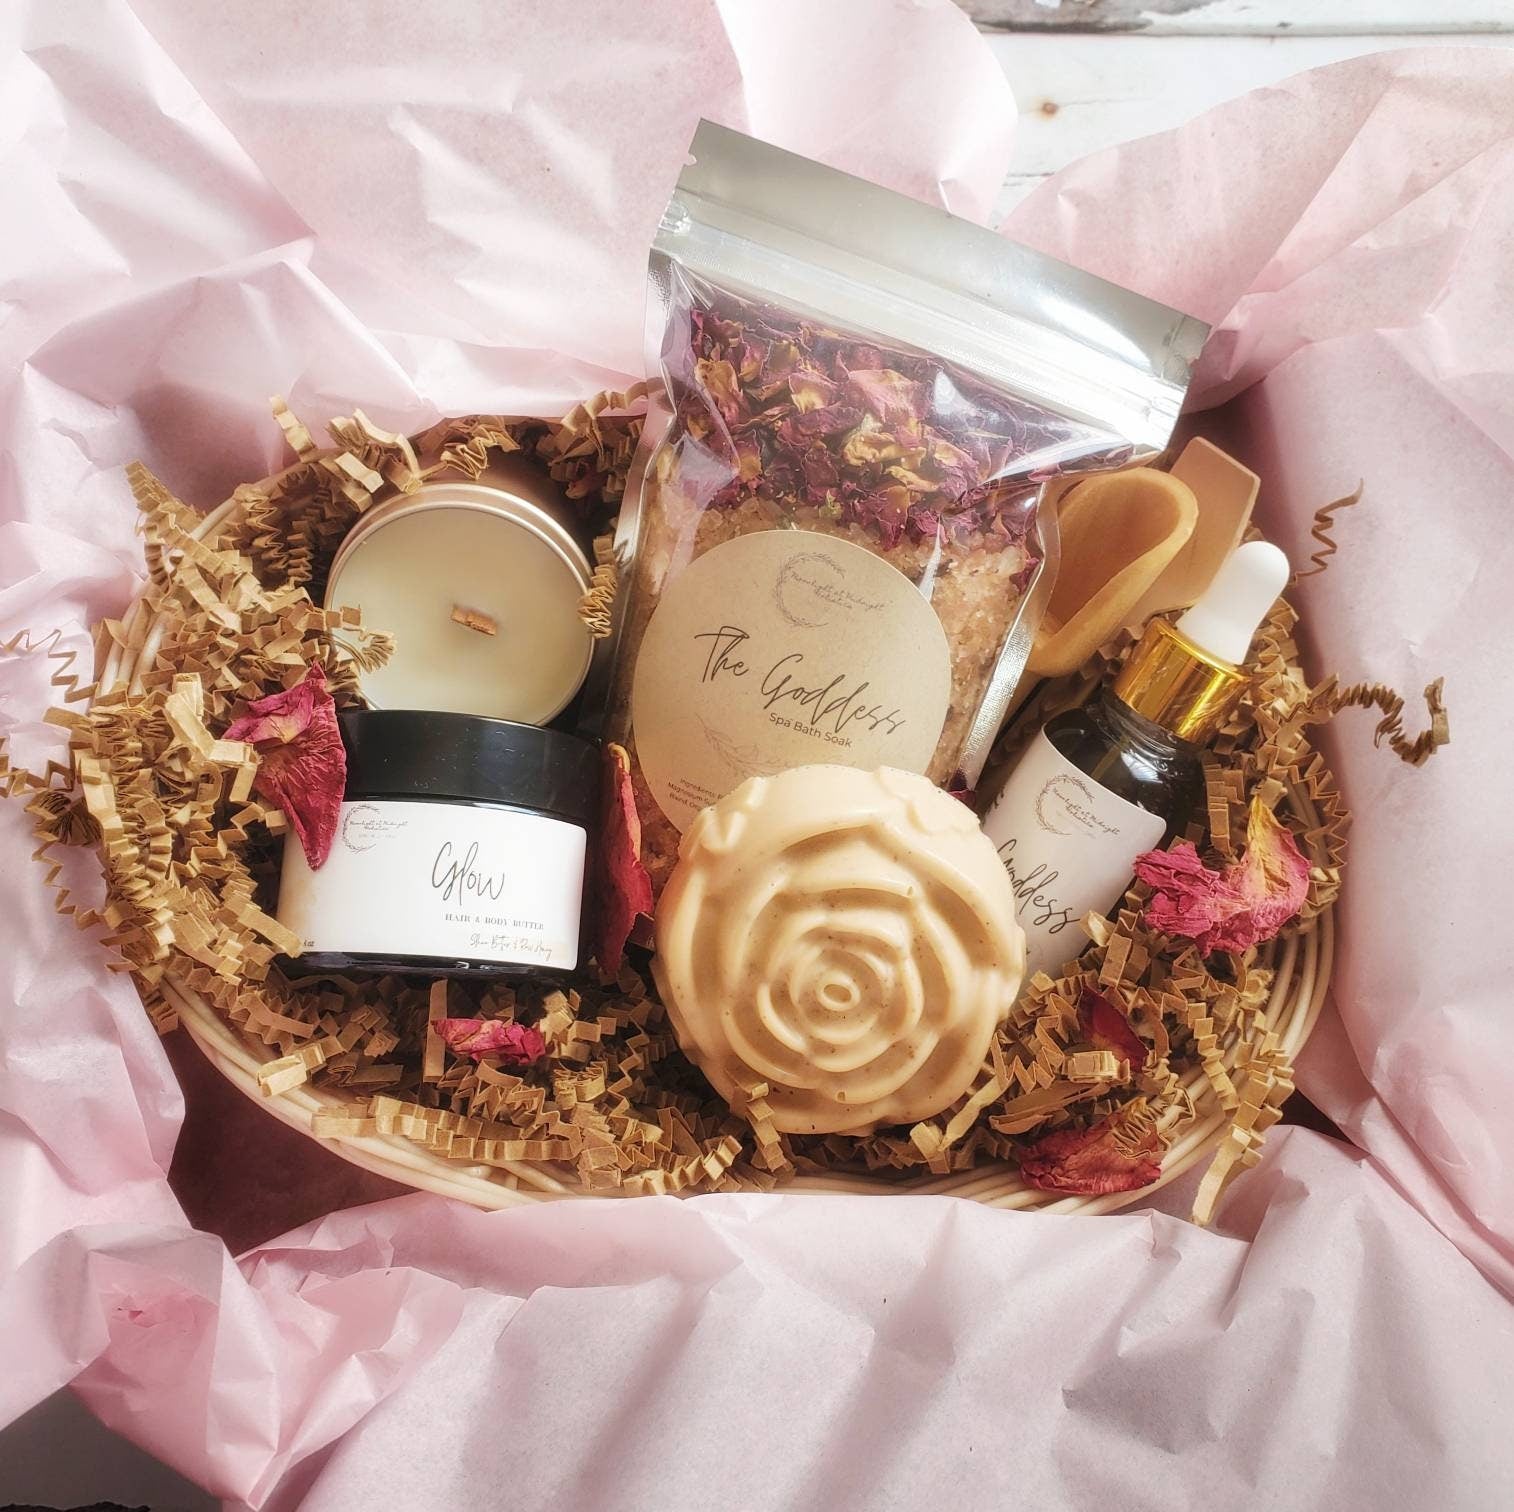 New Mom Home Spa Gift Basket - Relaxation Kit